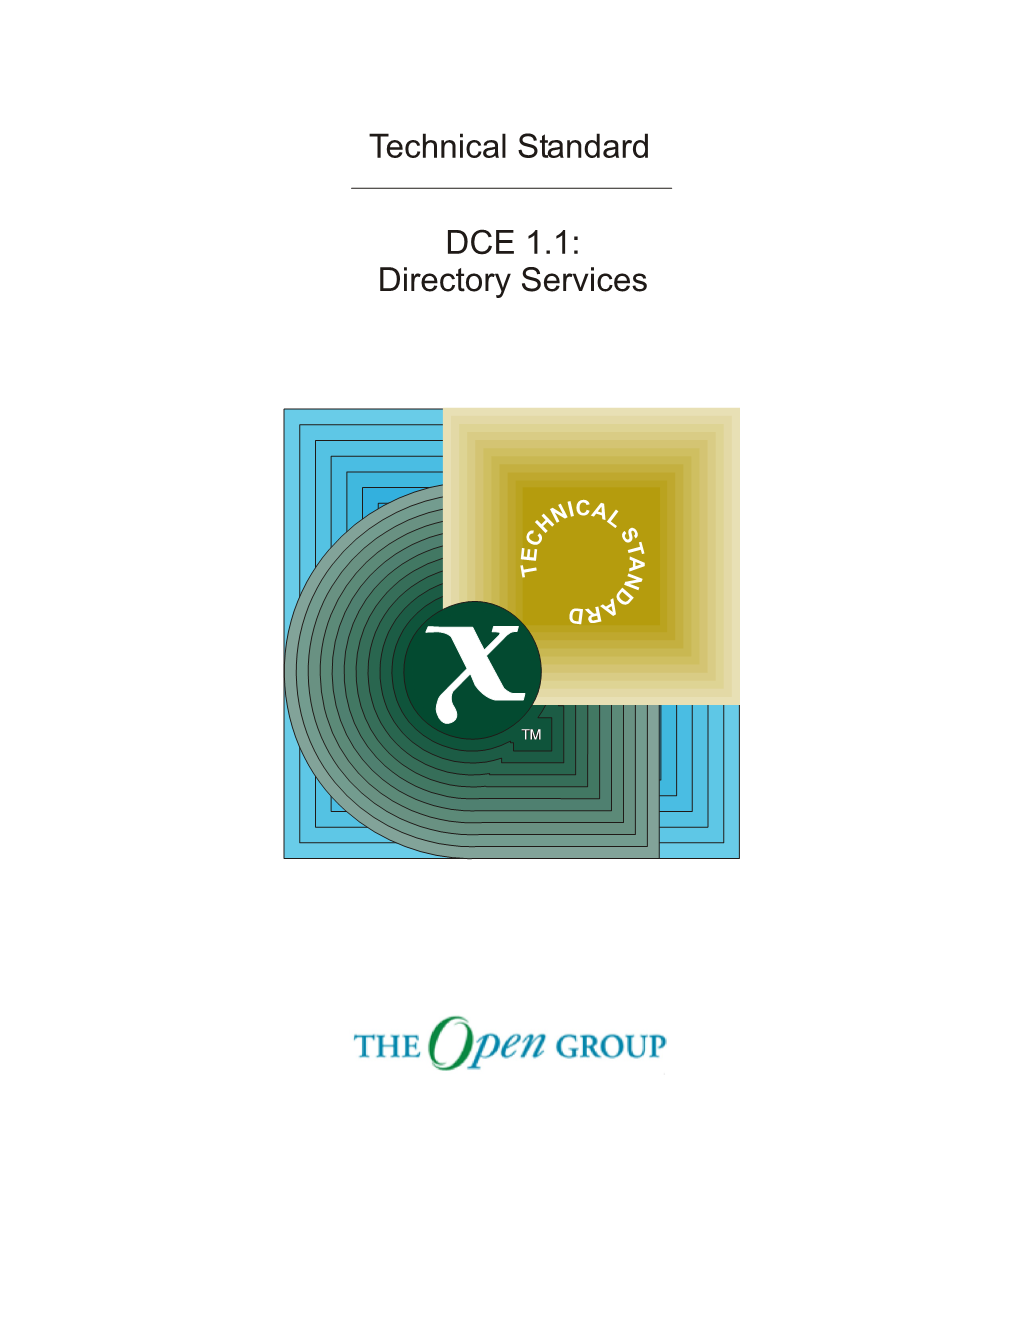 Technical Standard DCE 1.1: Directory Services